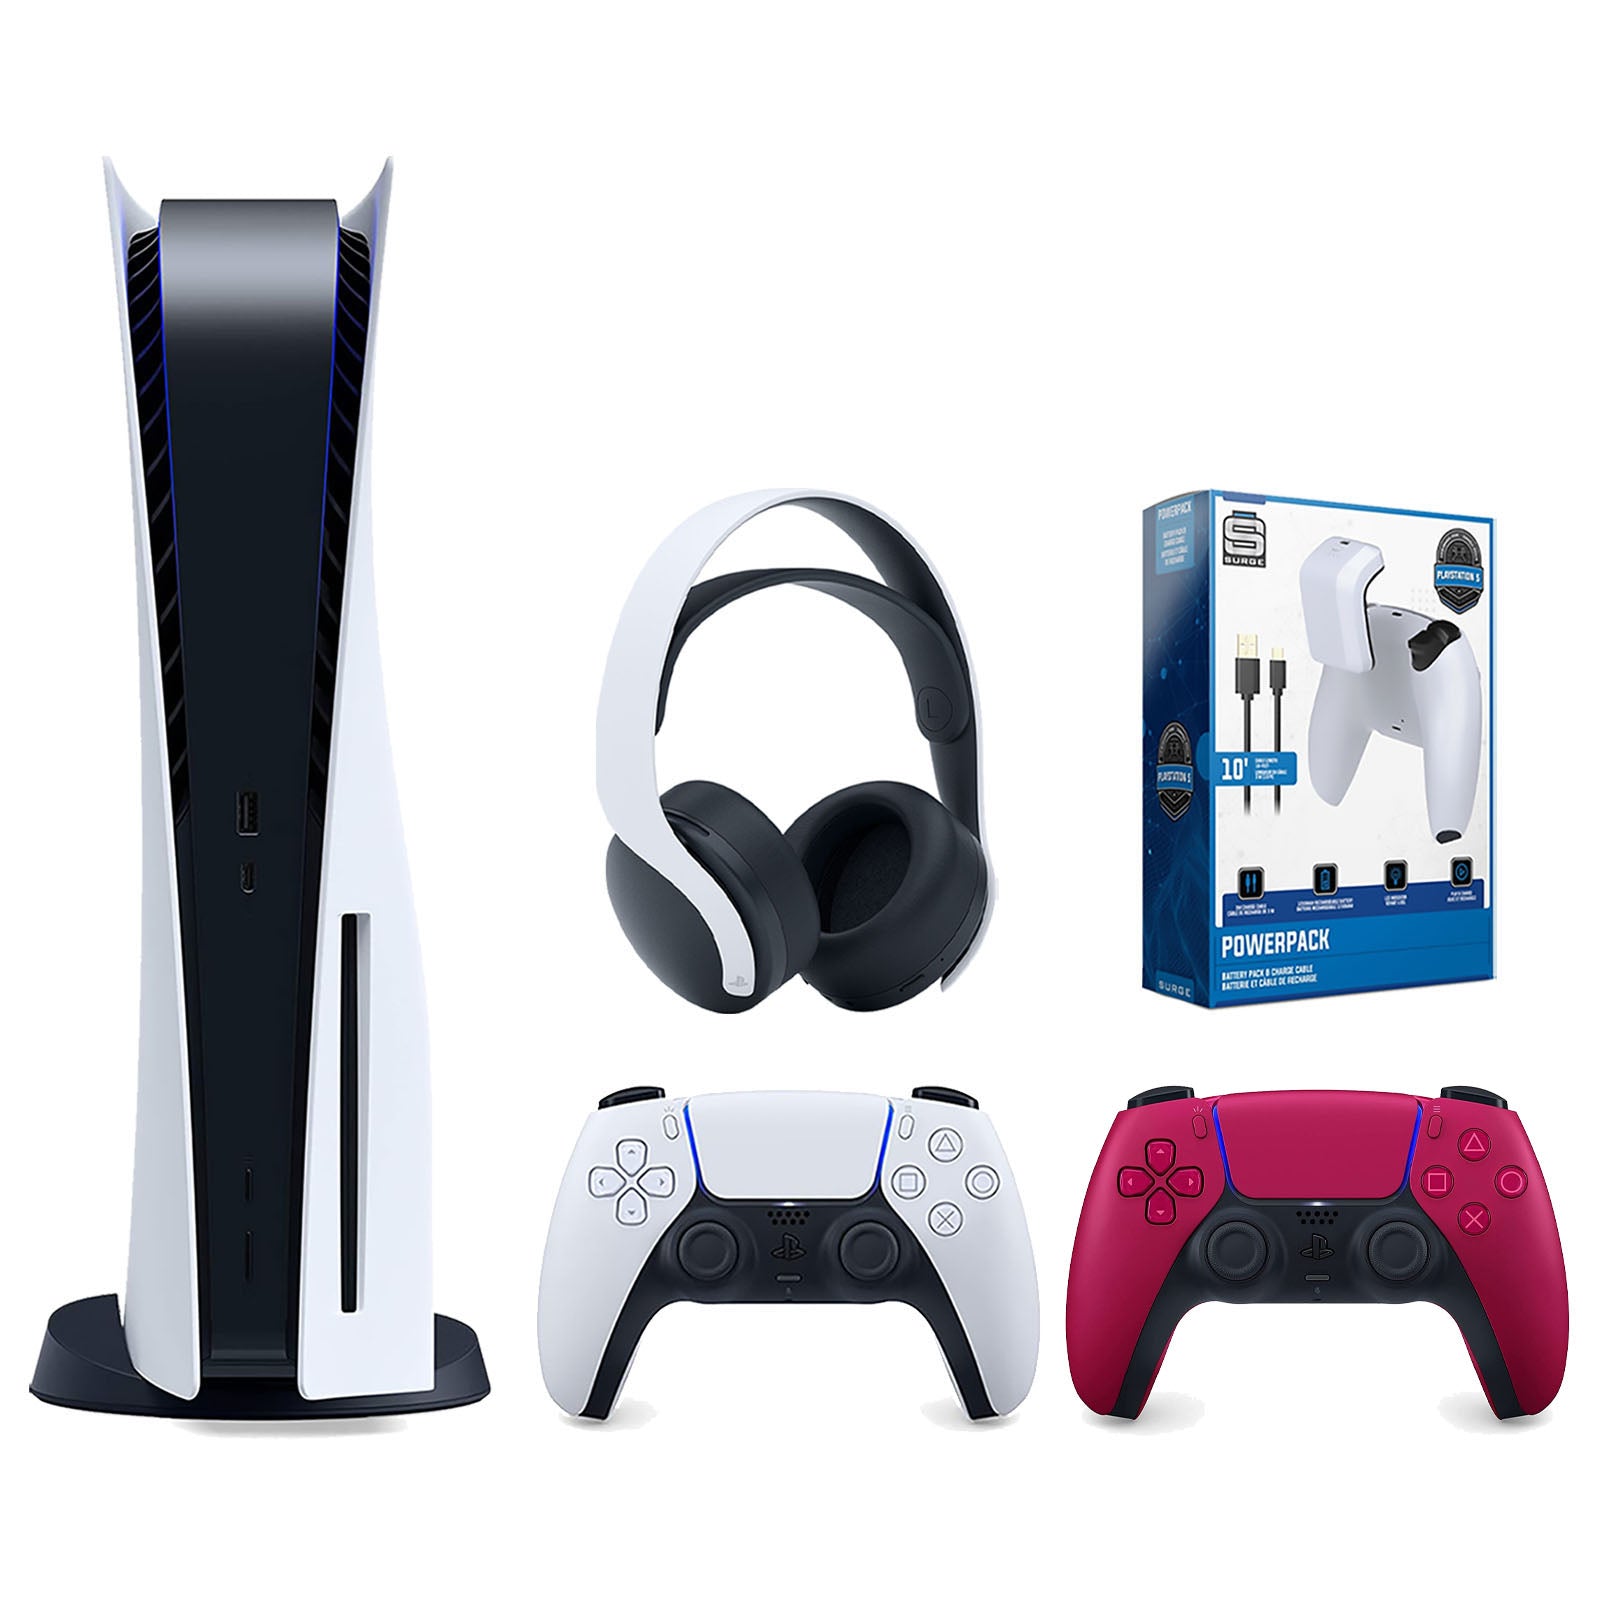 Sony Playstation 5 Disc Version Console with Extra Red Controller, White PULSE 3D Headset and Surge PowerPack Battery Pack & Charge Cable Bundle - Pro-Distributing